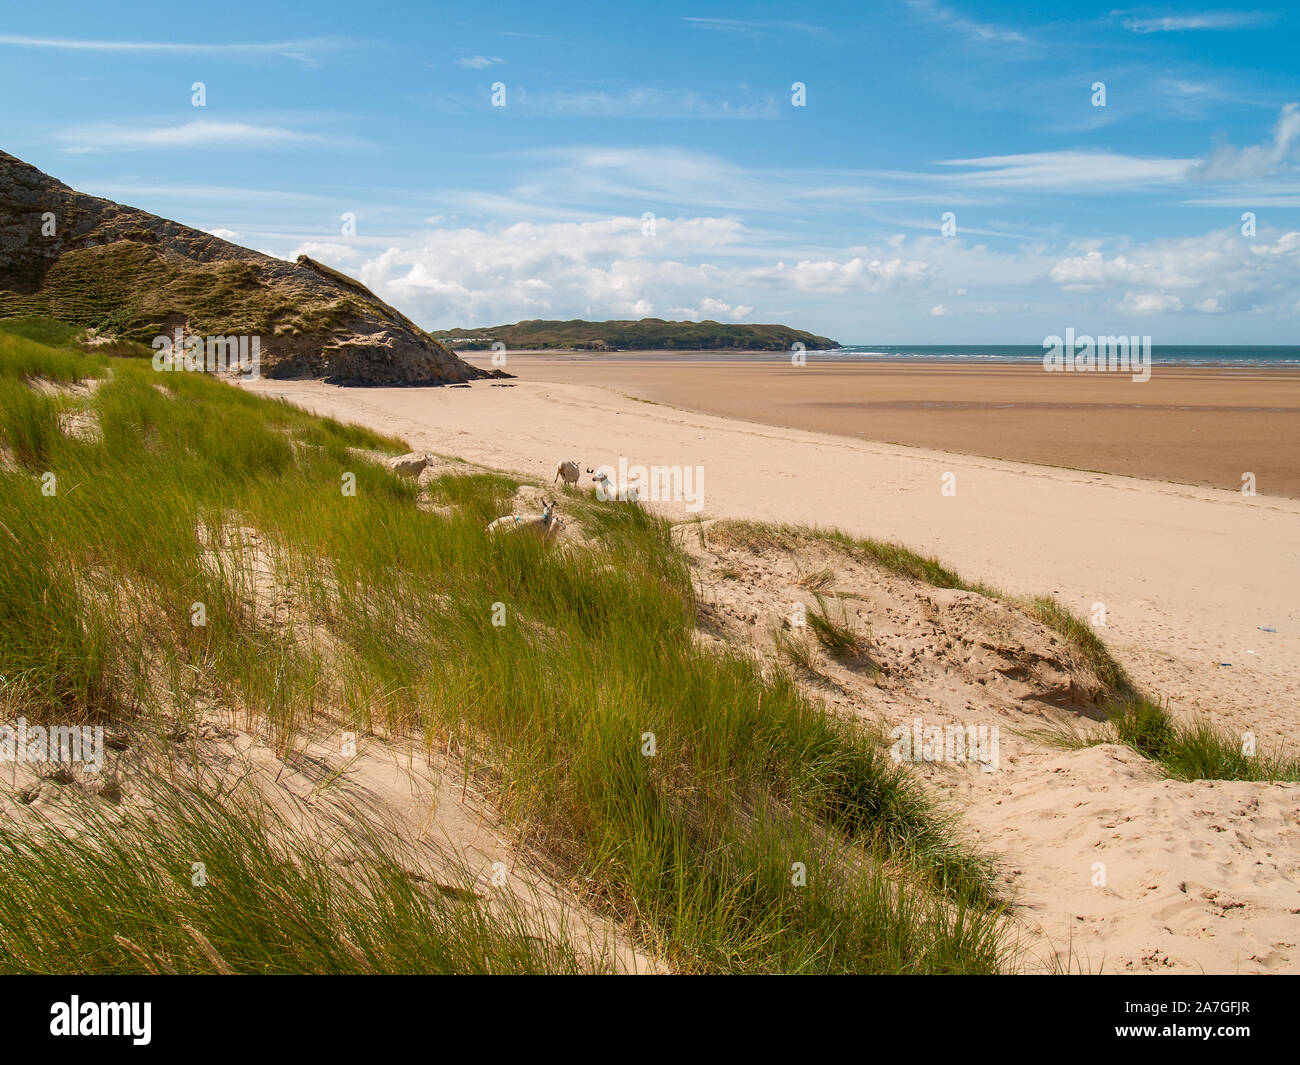 On Whiteford Sands looking Southwest towards Broughton Bay. A flock of sheep are grazing on the marram grass on the dunes. AONB. Llanmadoc, Gower Stock Photo